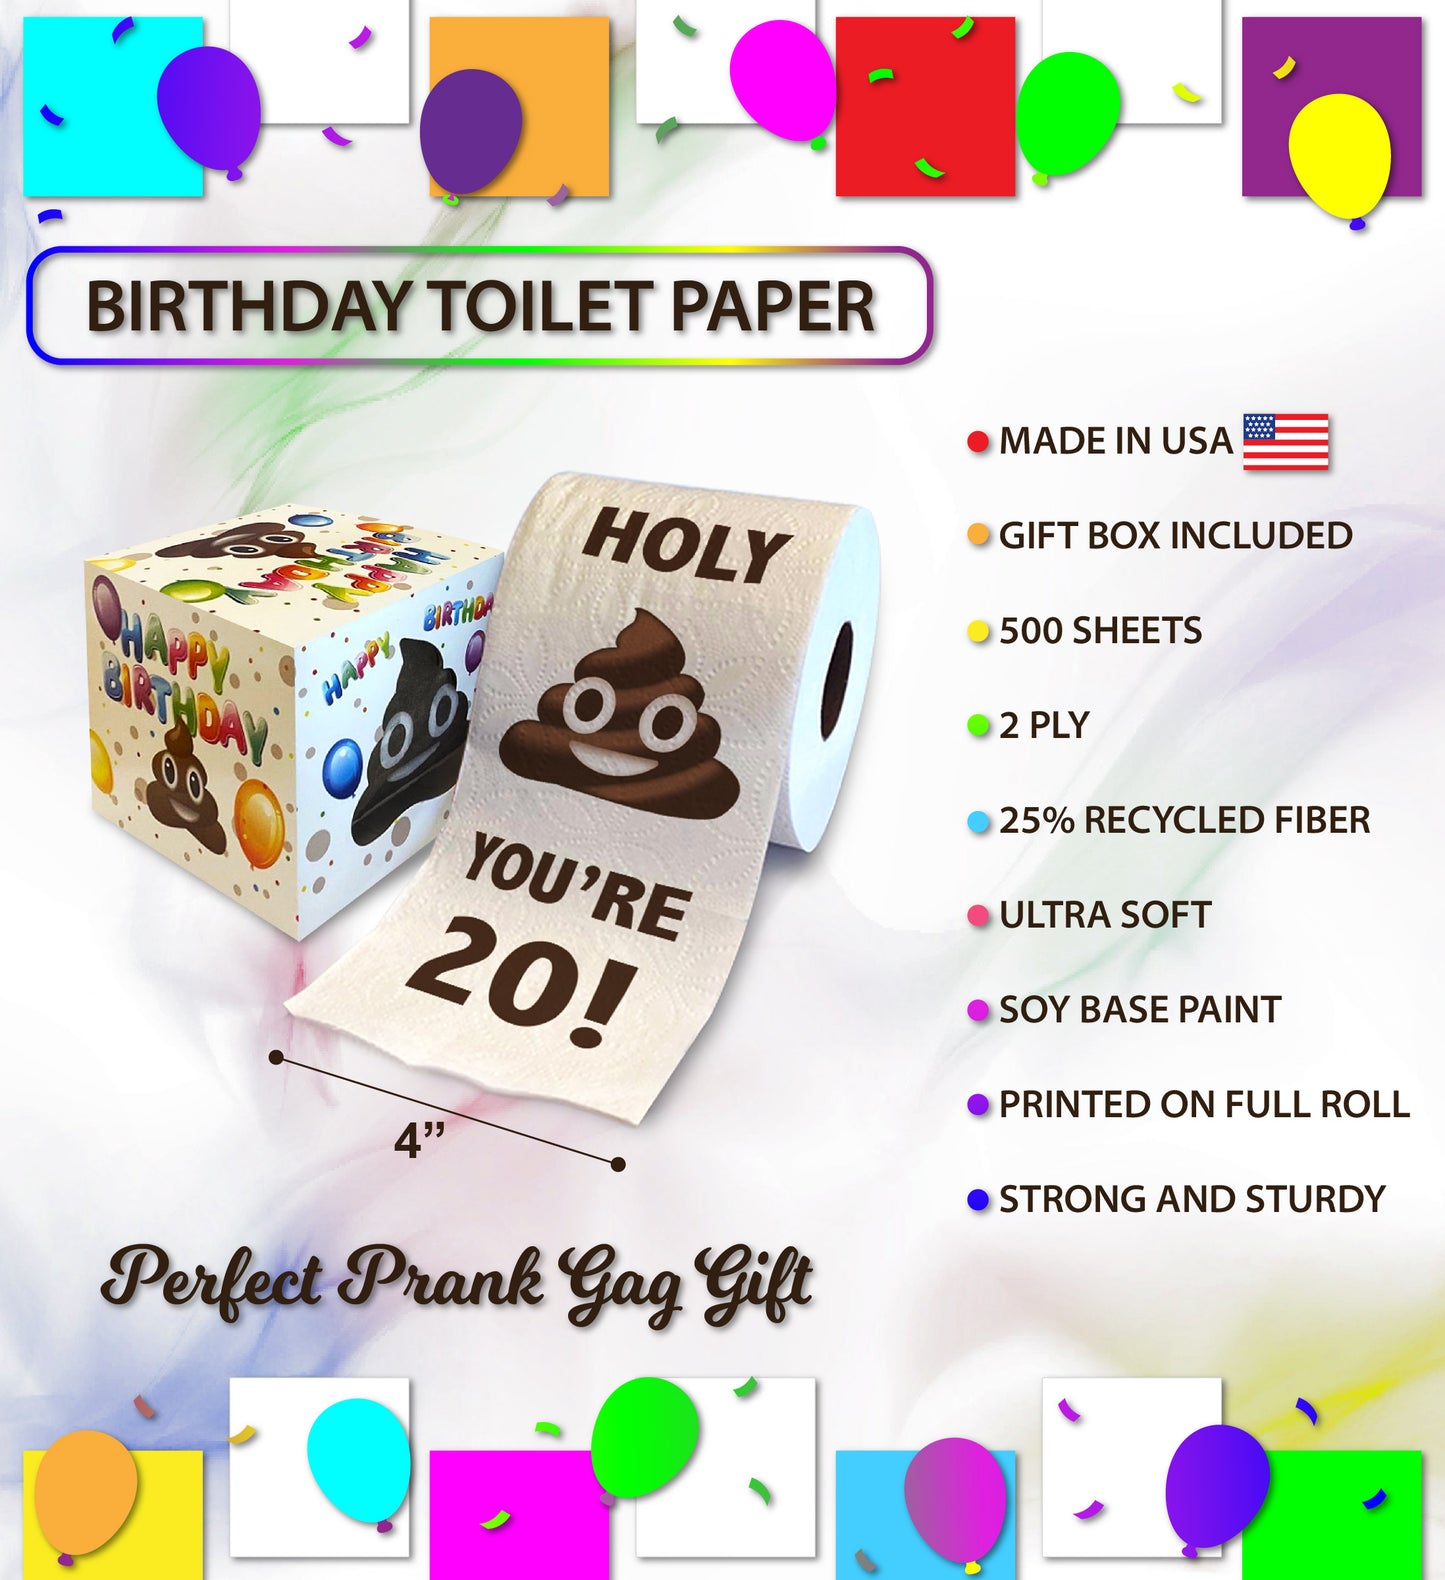 Printed TP Holy Poop You're 20 Printed Toilet Paper Funny Gag Gift – 500 Sheets